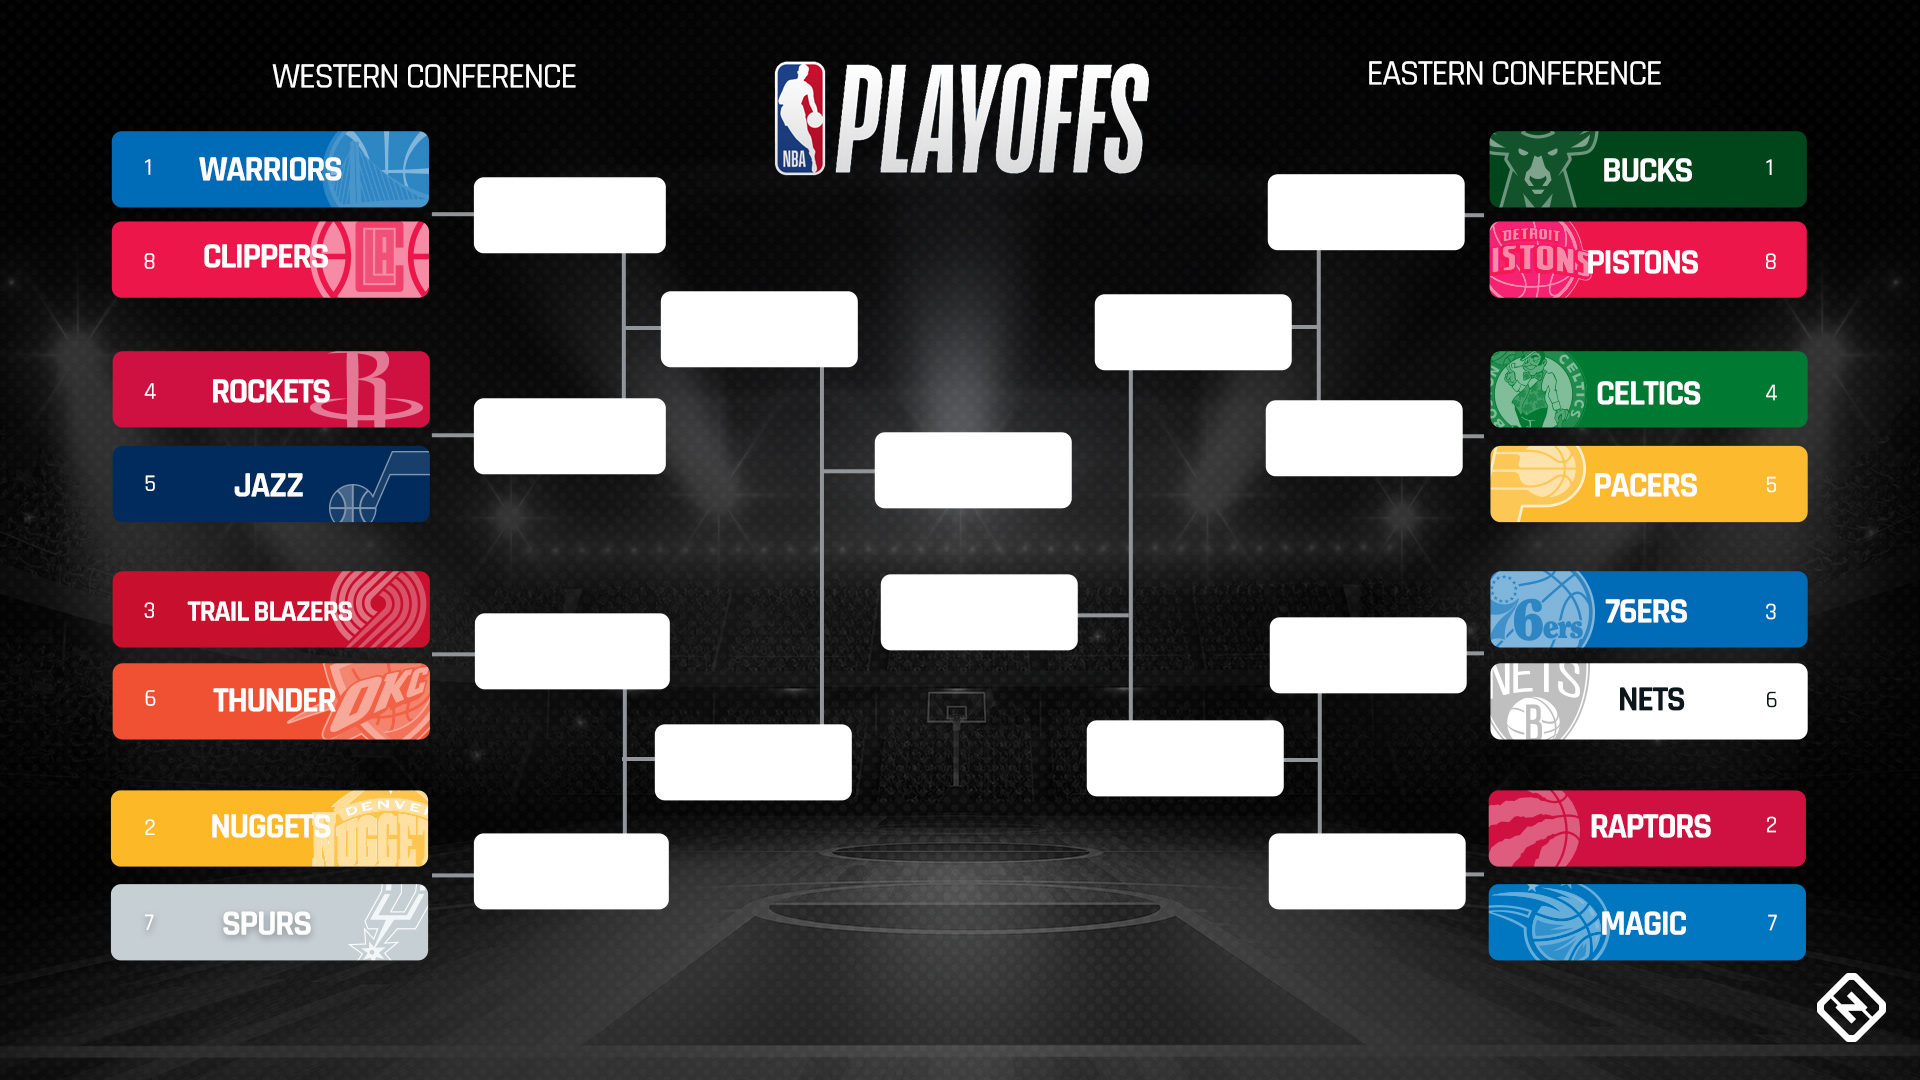 NBA playoffs schedule 2019: Full bracket, dates, times, TV channels for ...